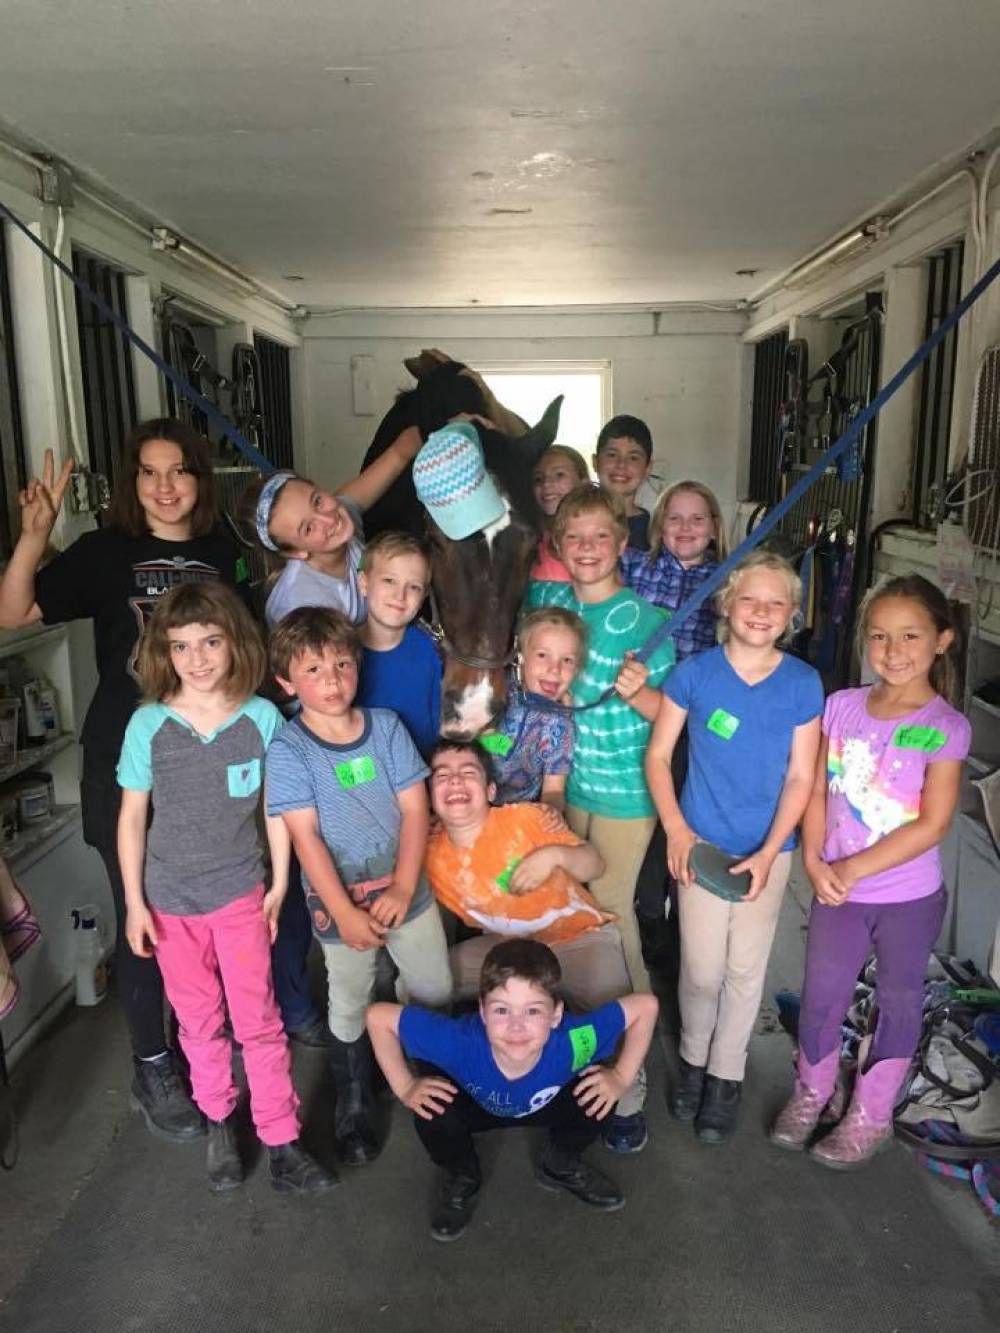 TOP RHODE ISLAND ADVENTURE CAMP: Faith Hill Farm is a Top Adventure Summer Camp located in East Greenwich Rhode Island offering many fun and enriching Adventure and other camp programs. 